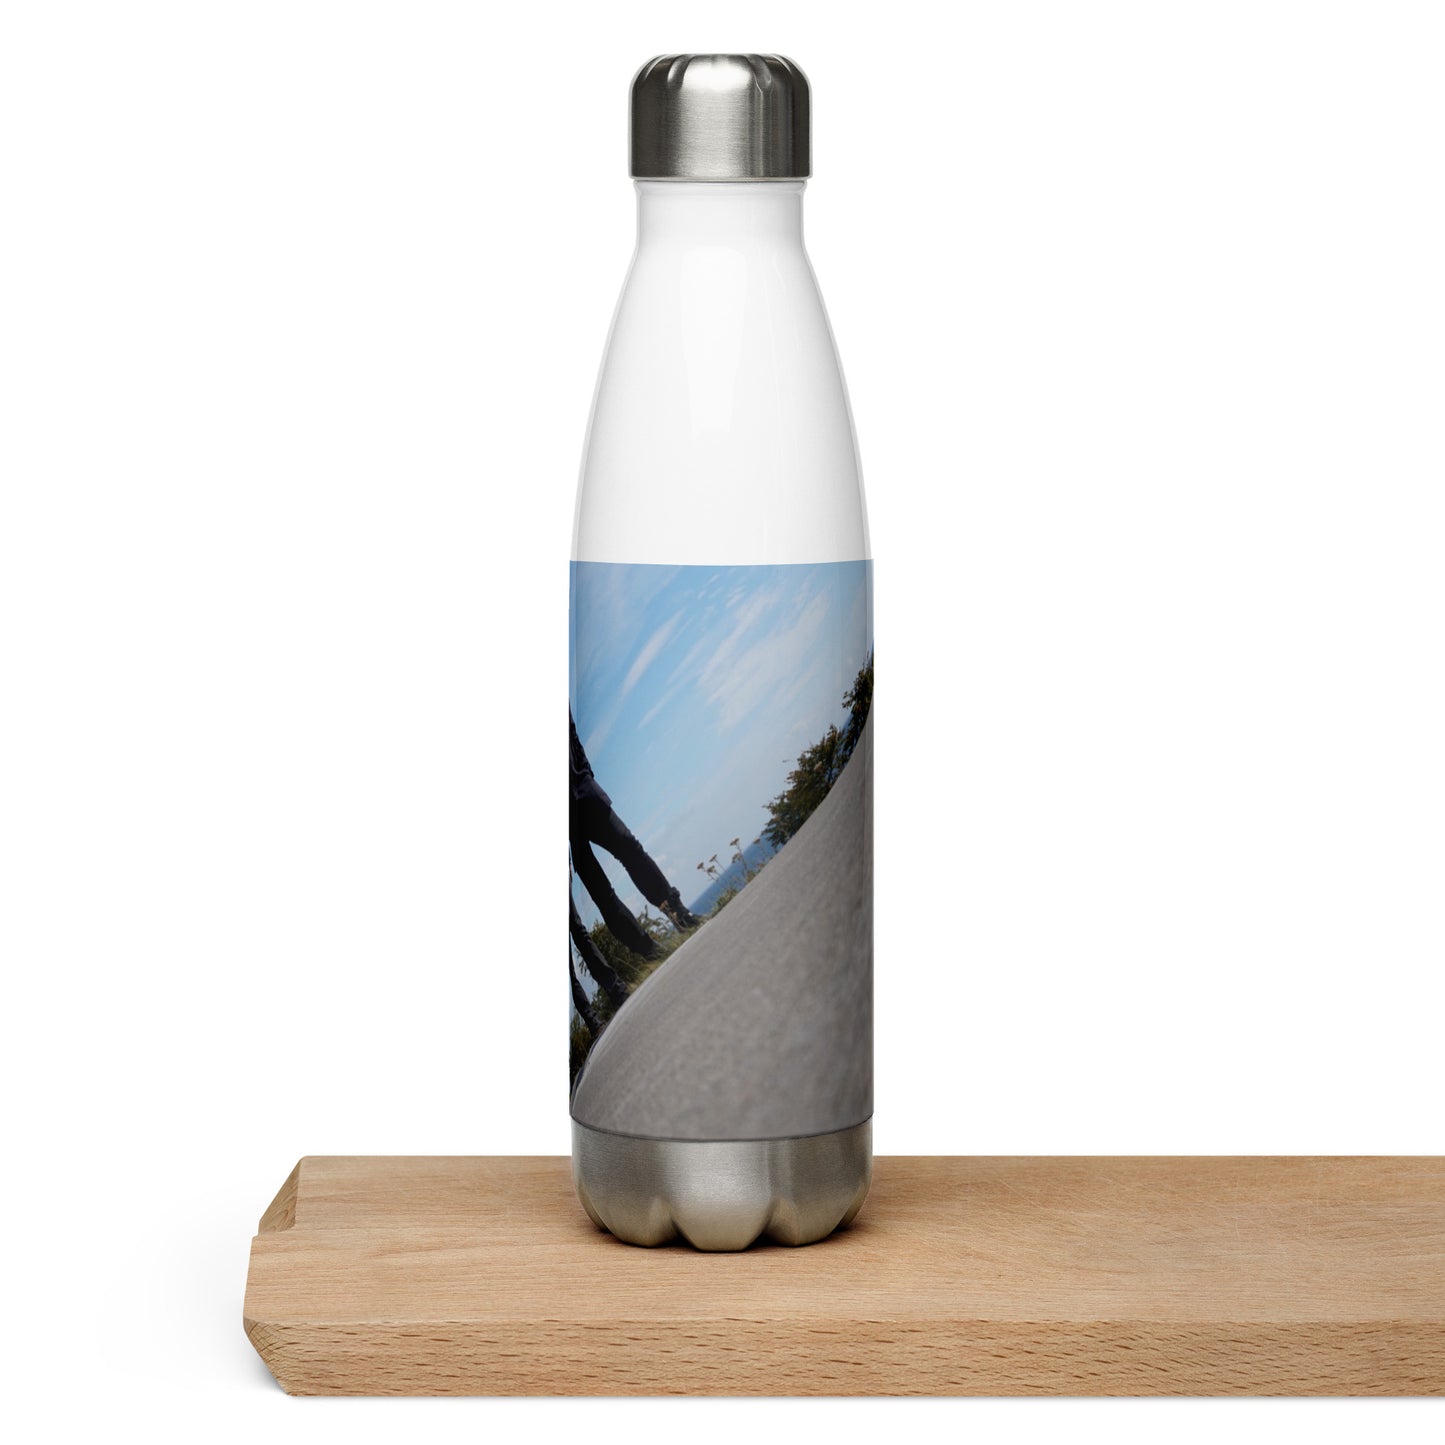 Disrupted Being, official photo and logo, Stainless Steel Water Bottle